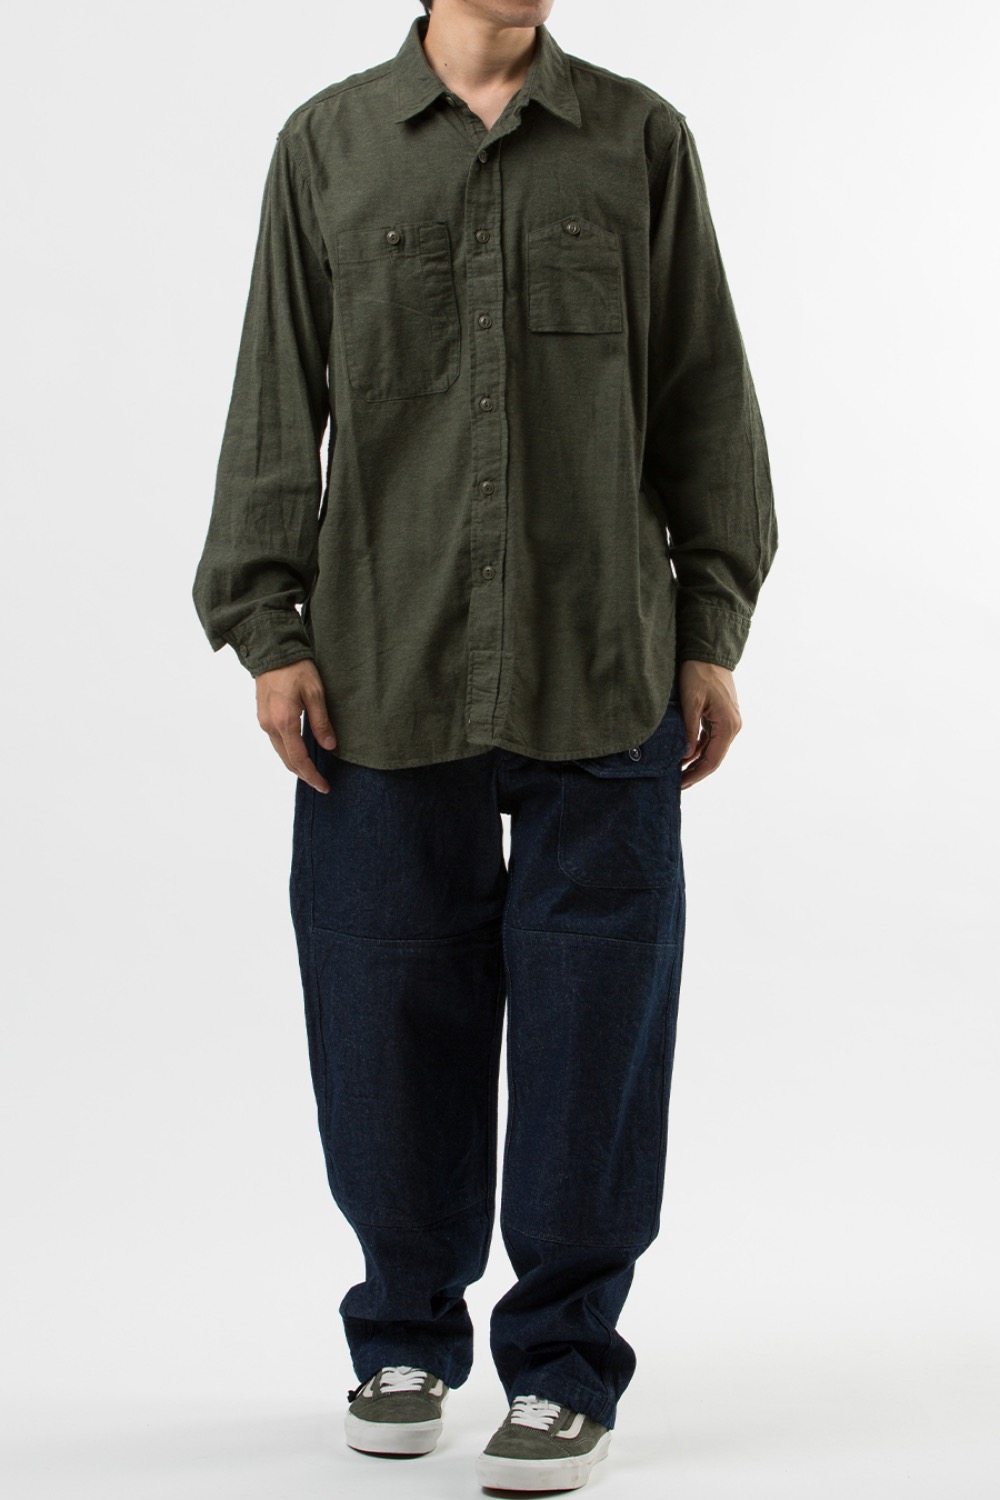 (22FW) WORK SHIRT OLIVE SOLID COTTON FLANNEL